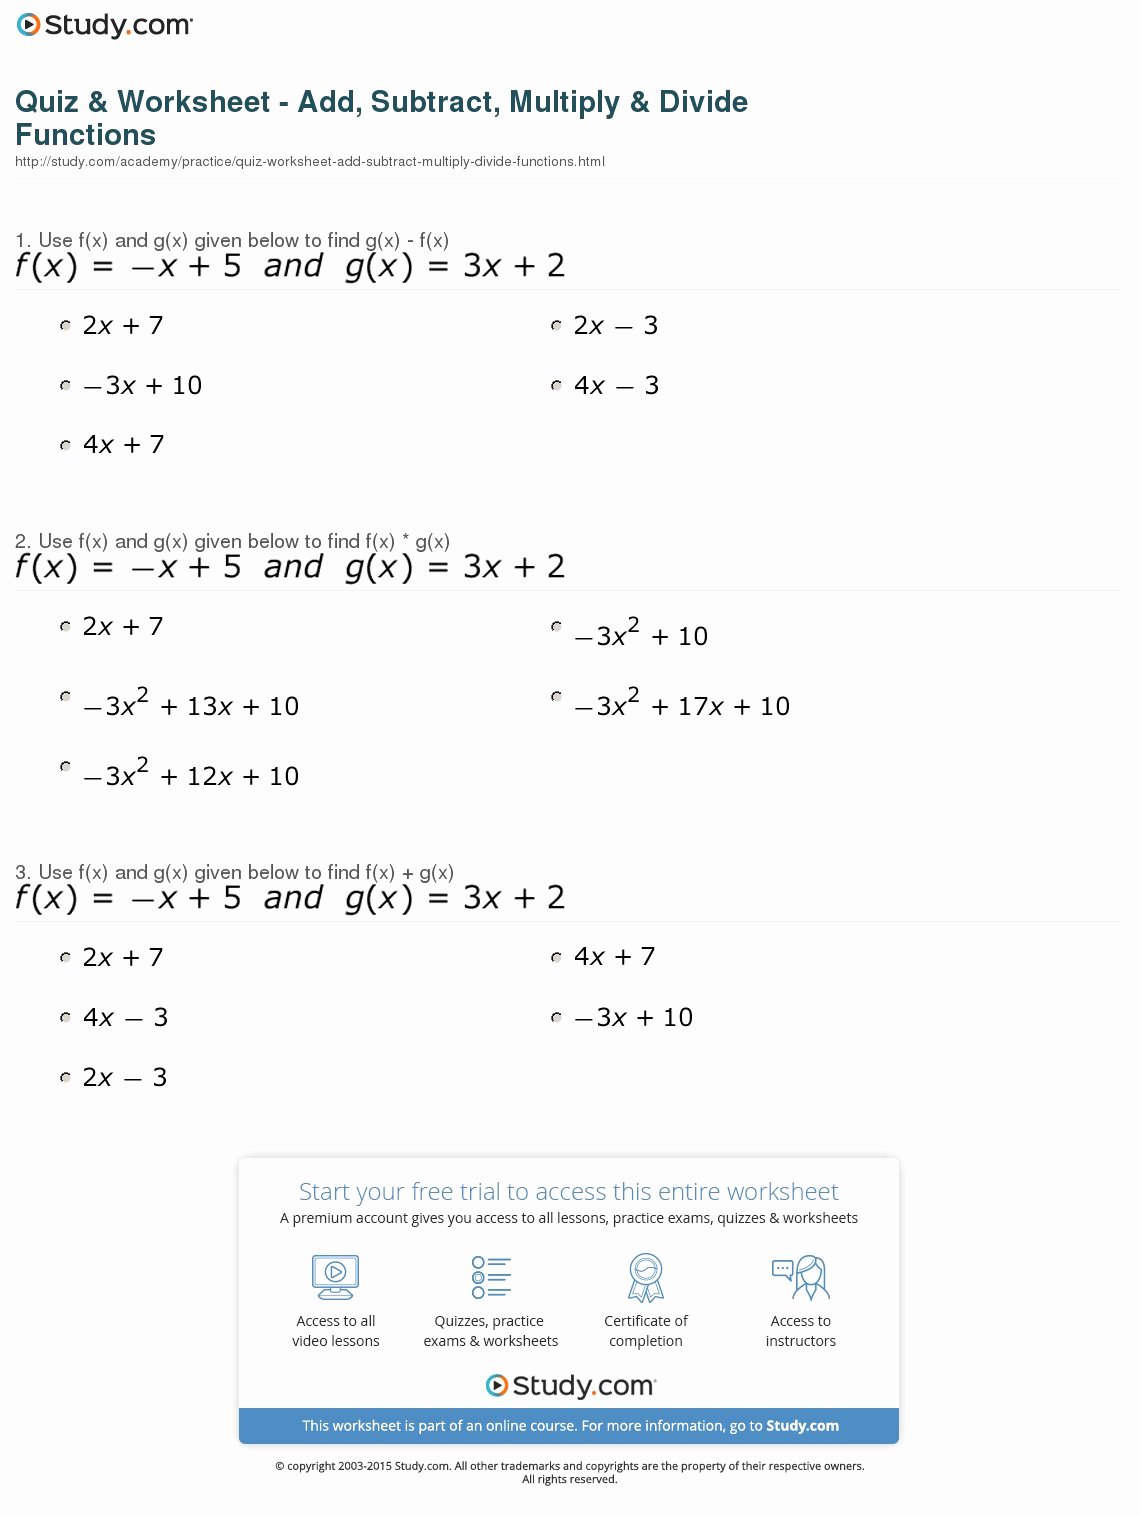 Operations On Functions Worksheet Fresh Quiz &amp; Worksheet Add Subtract Multiply &amp; Divide